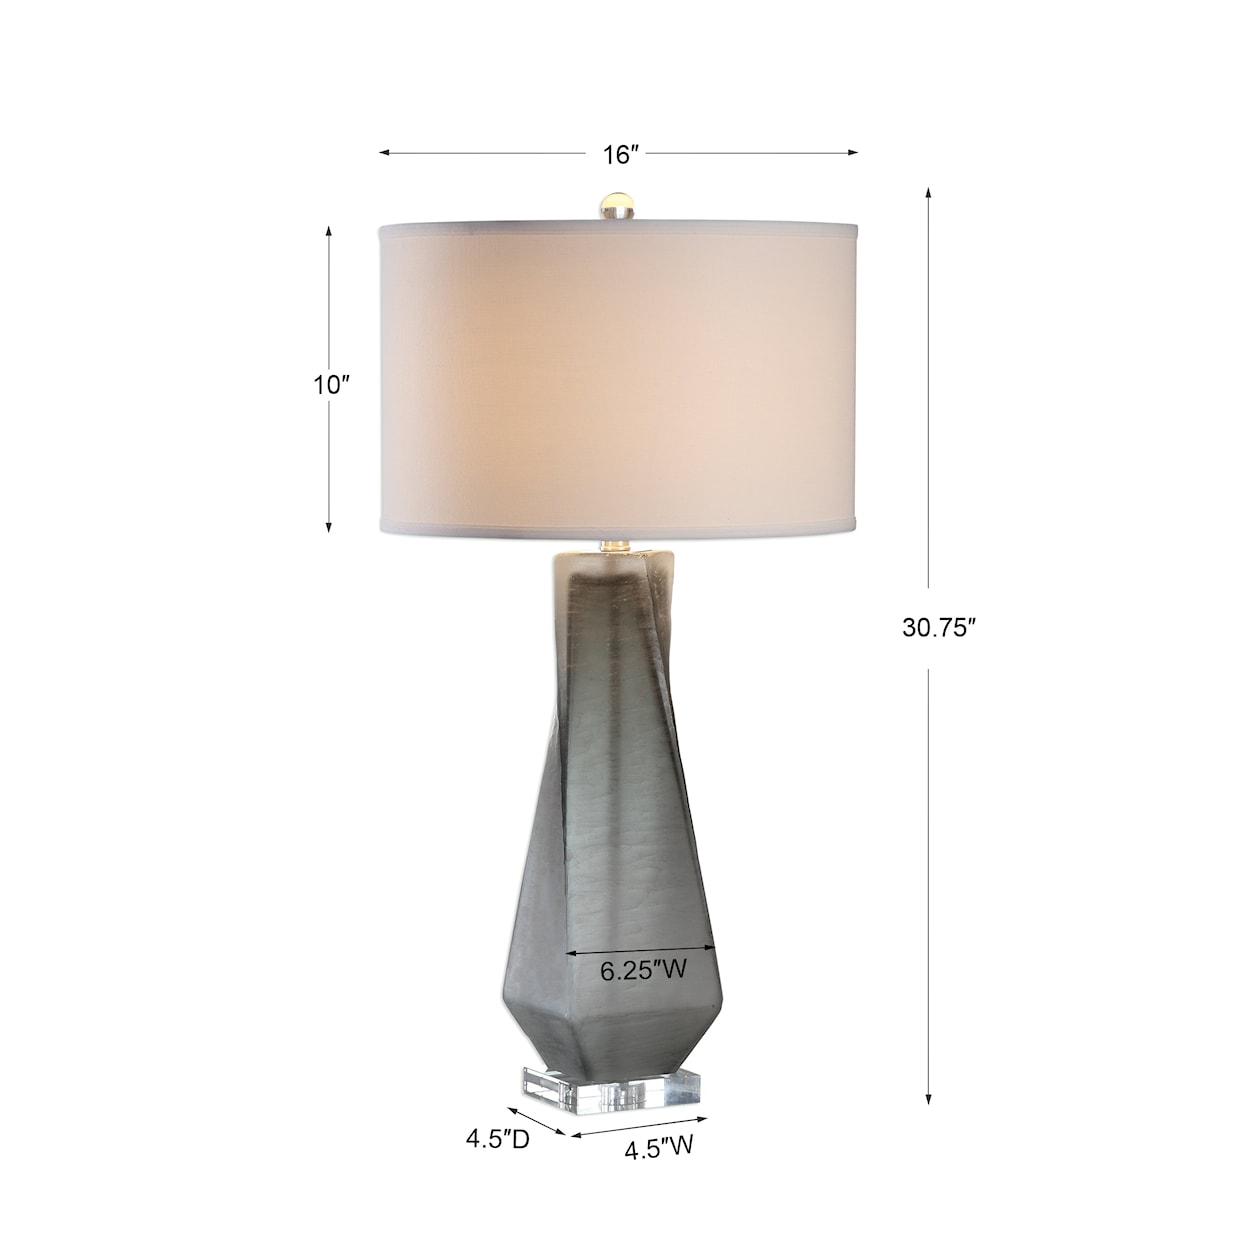 Uttermost Table Lamps Anatoli Charcoal Gray Table Lamp